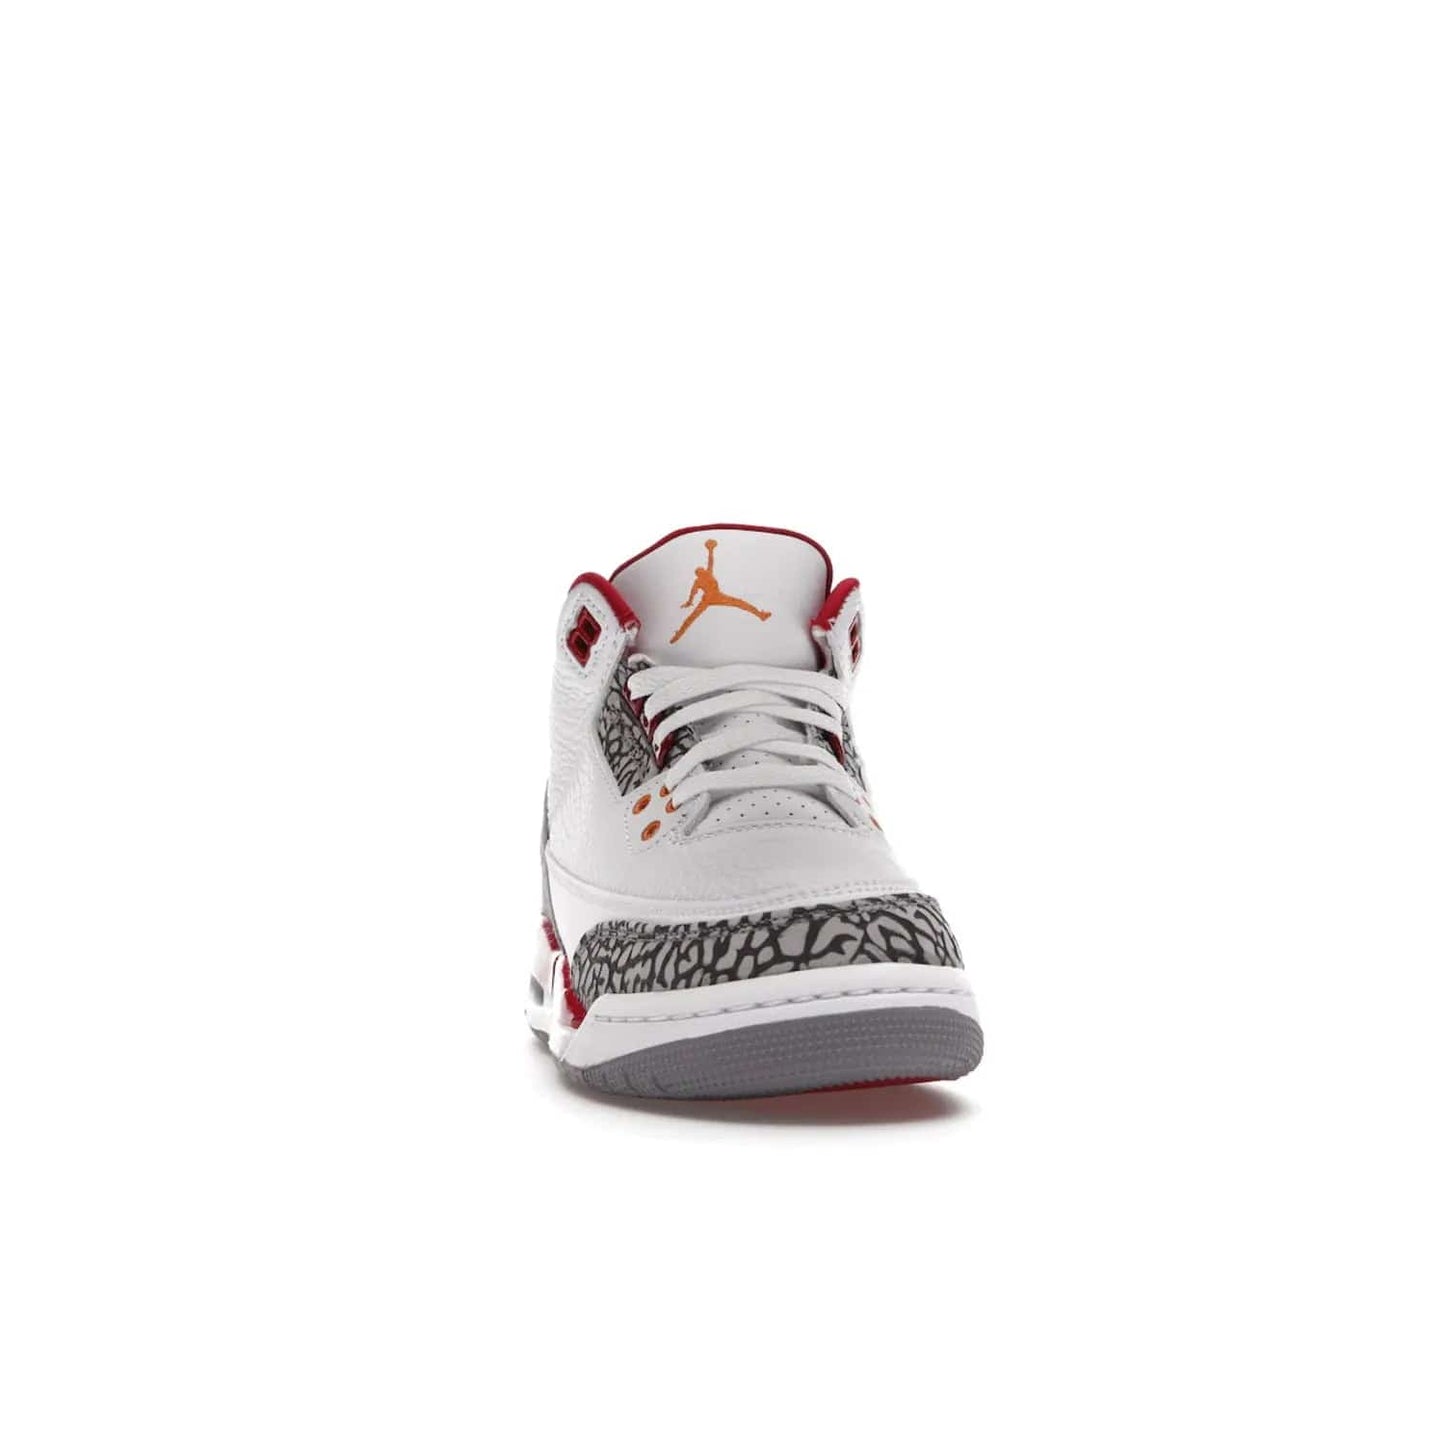 Jordan 3 Retro Cardinal (GS) - Image 9 - Only at www.BallersClubKickz.com - Shop the kid-sized Air Jordan 3 Retro Cardinal GS, released Feb 2022. White tumbled leather upper, light curry accenting, cement grey and classic red details throughout. Visible Air cushioning, midsole, and an eye-catching outsole. Show off your style with this fashionable streetwear silhouette.